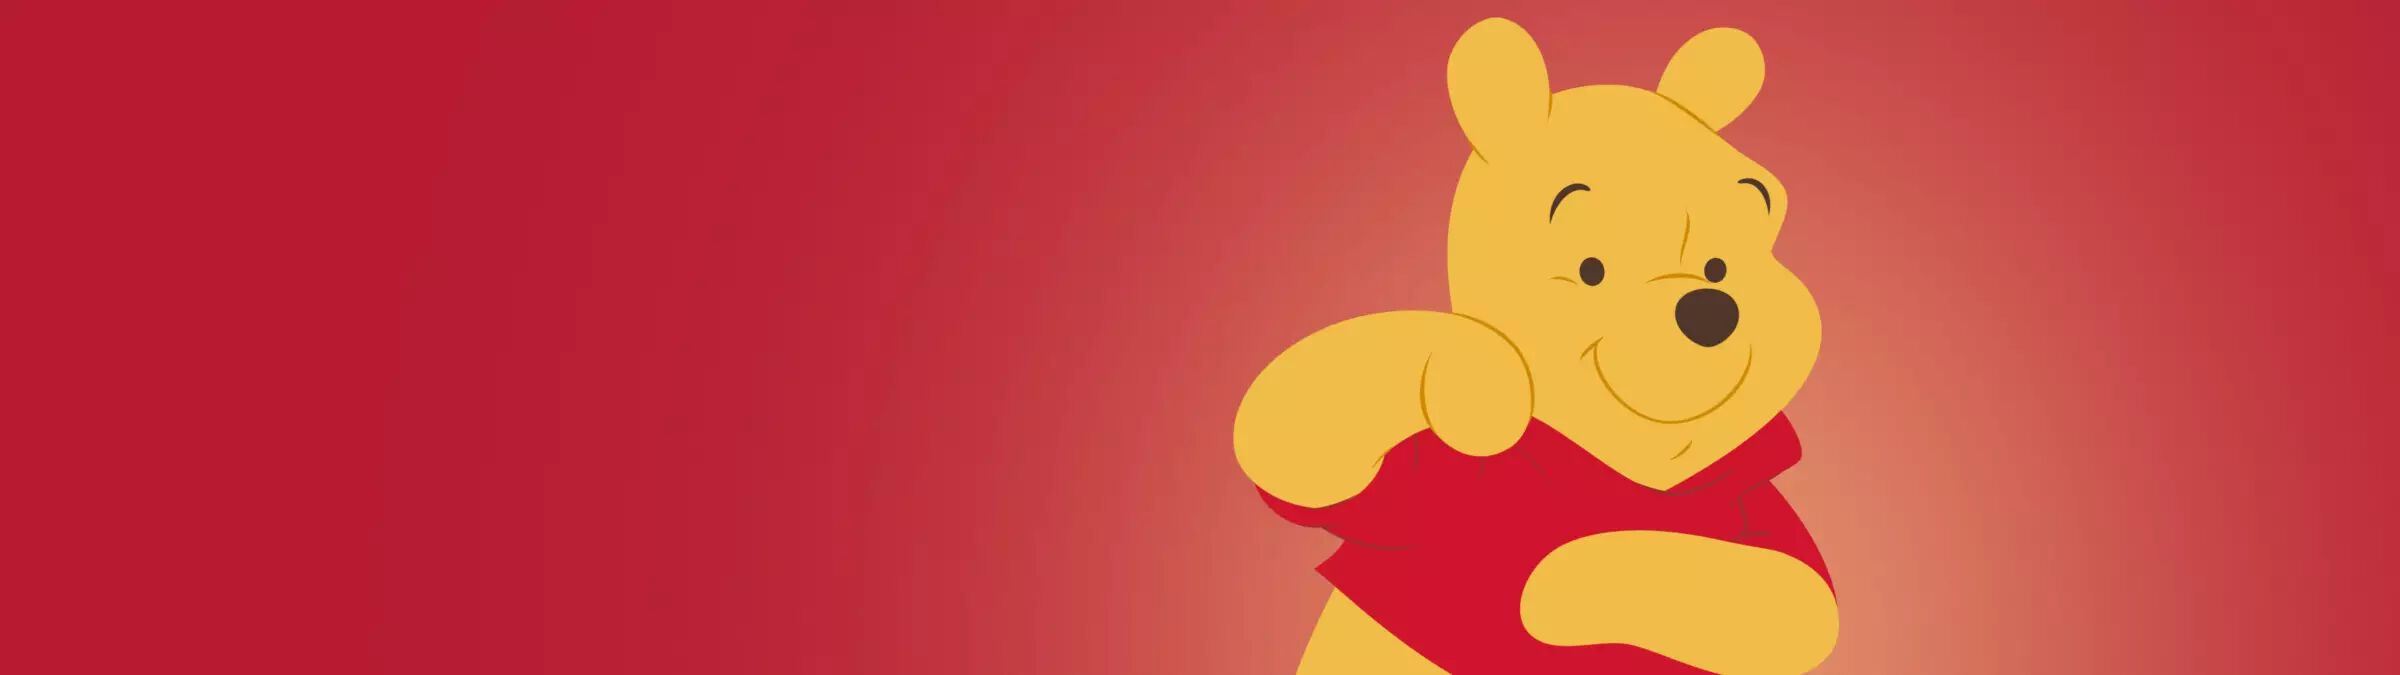 Winnie the Pooh Character Banner